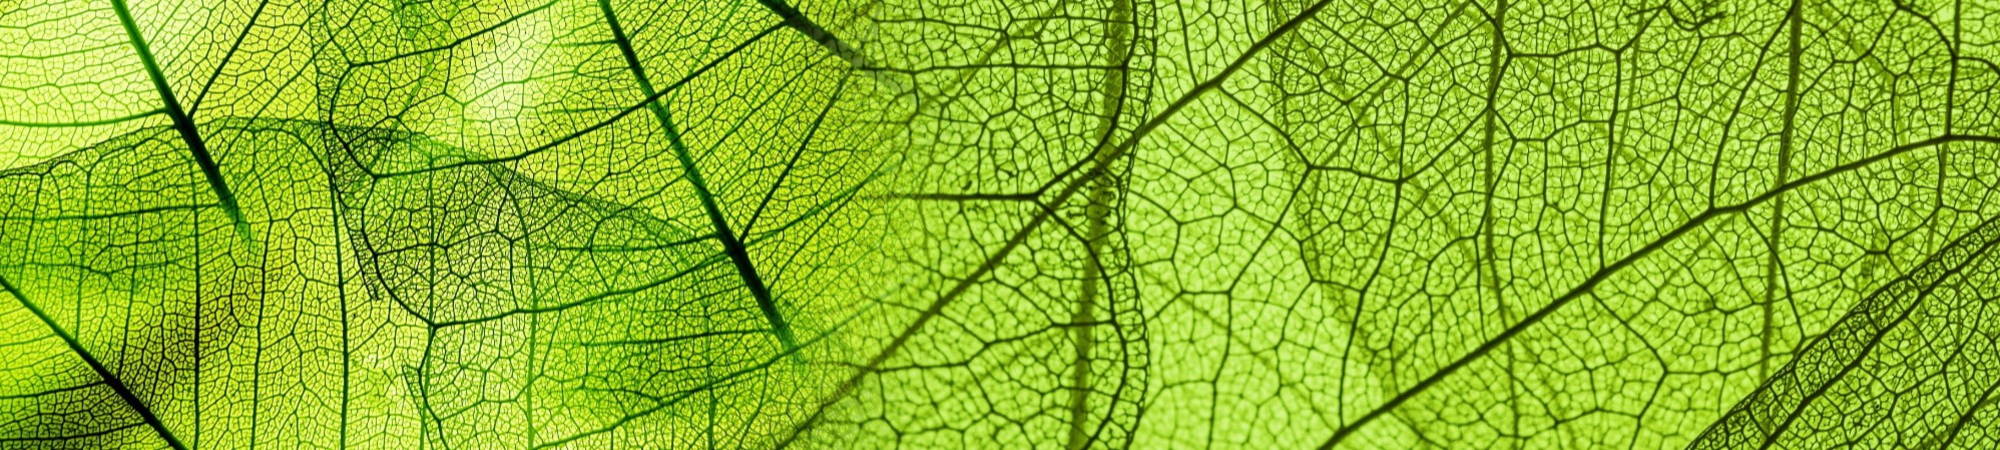 A close up photograph of a green leaf